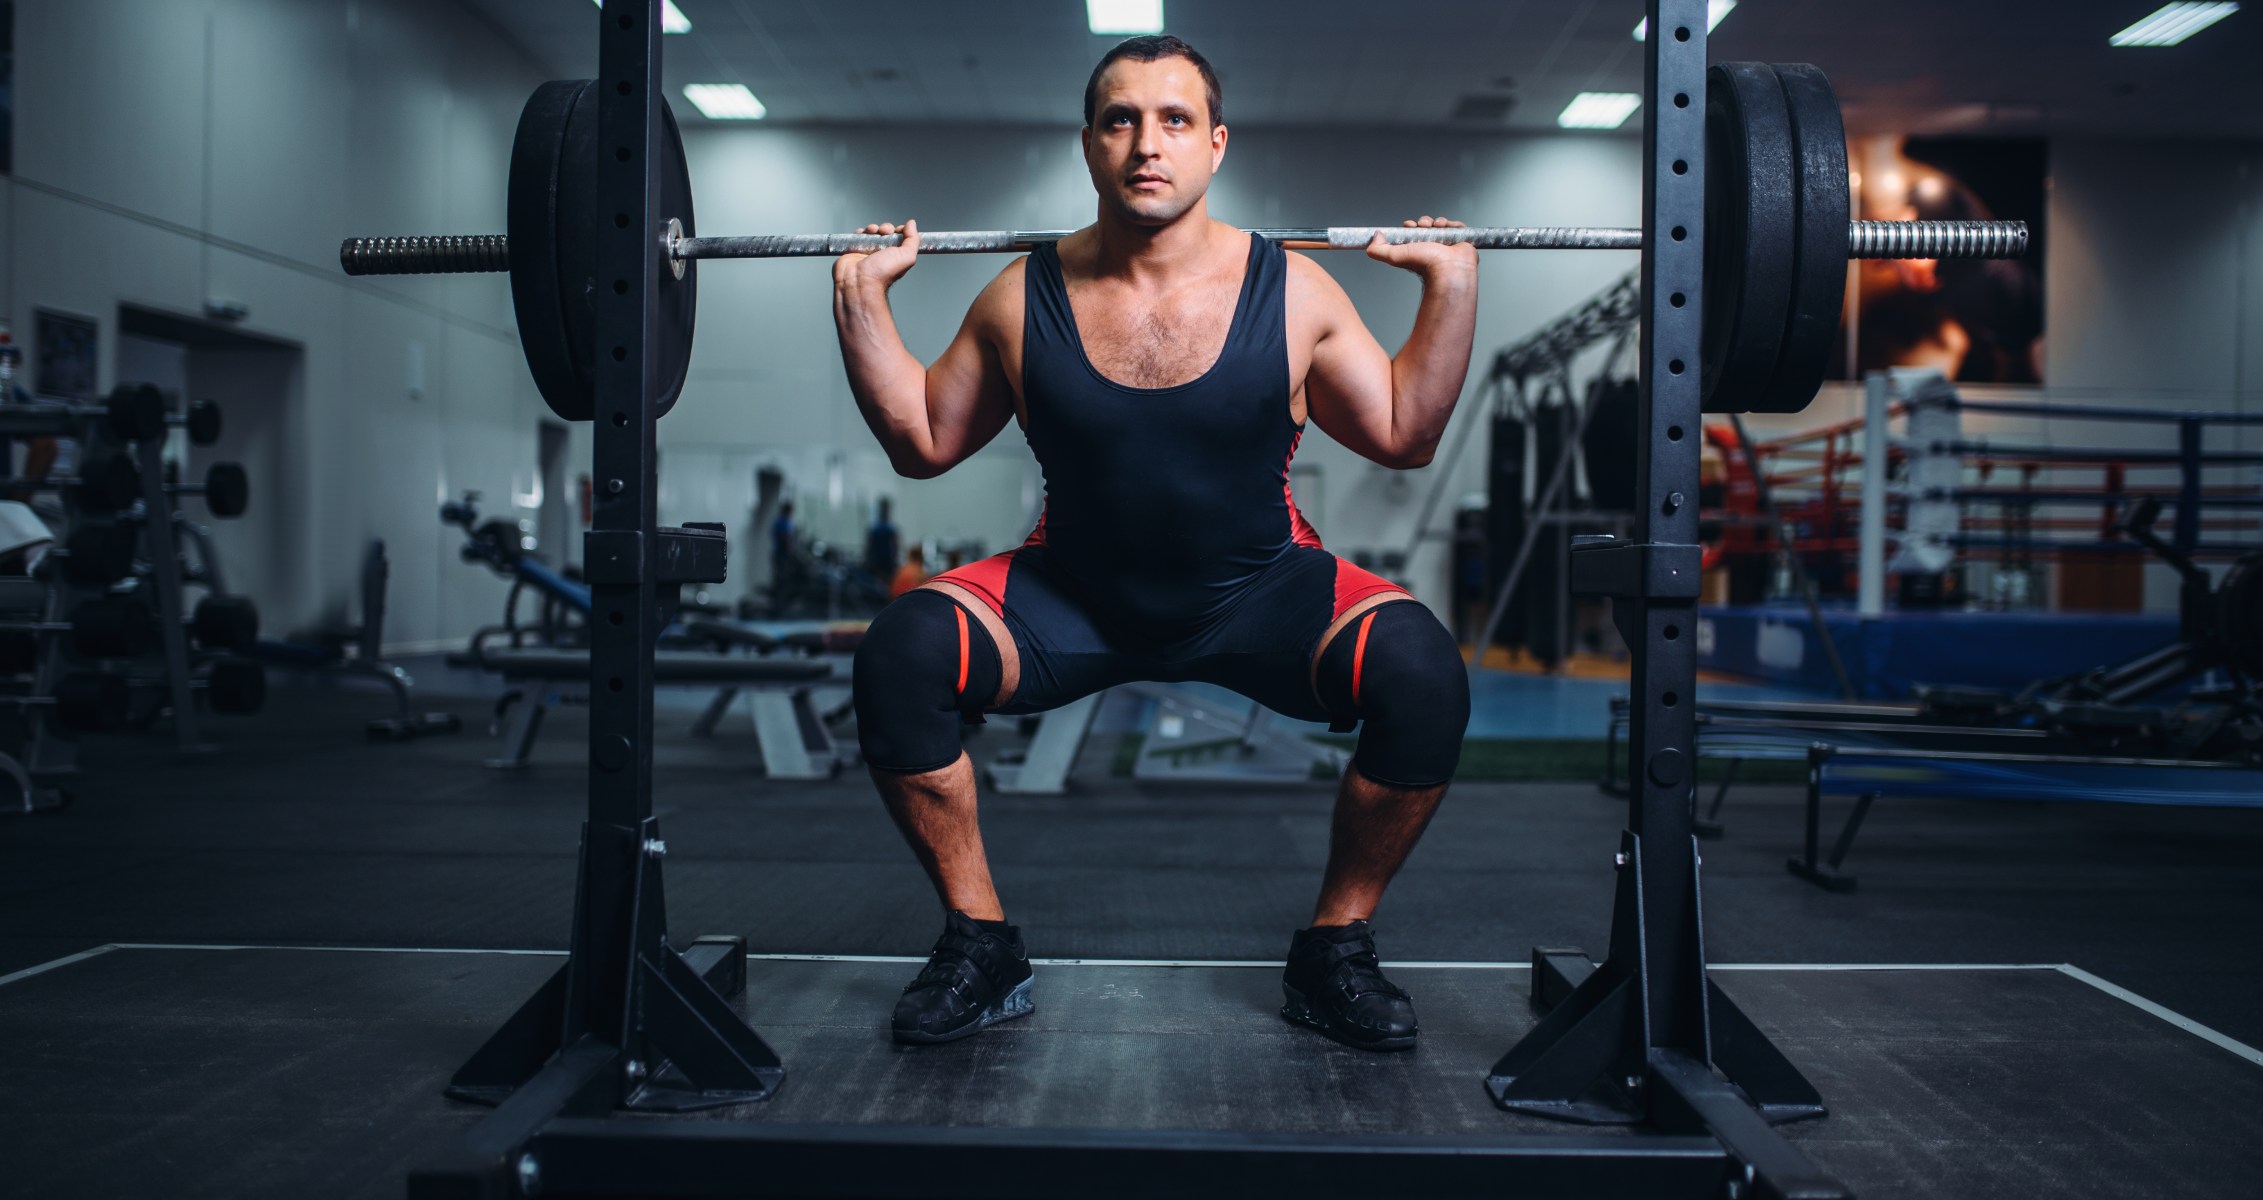 Instantly Improve Your Squats and Leg Gains with these 5 Tips